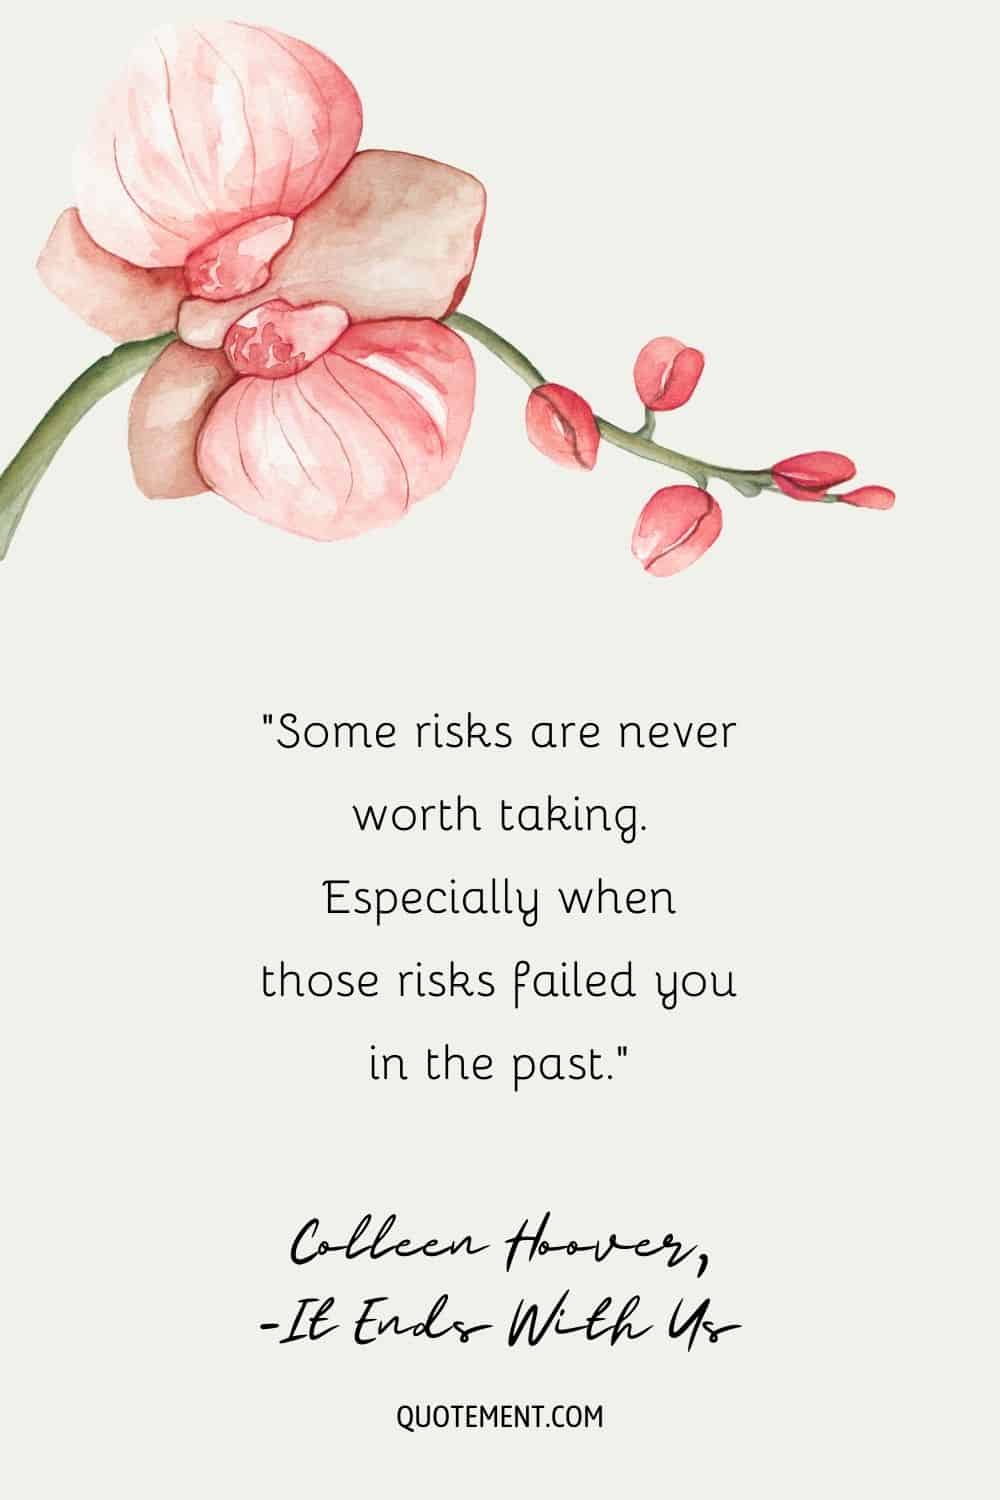 Quote on risks by Colleen Hoover on a flower-illustrated background.
